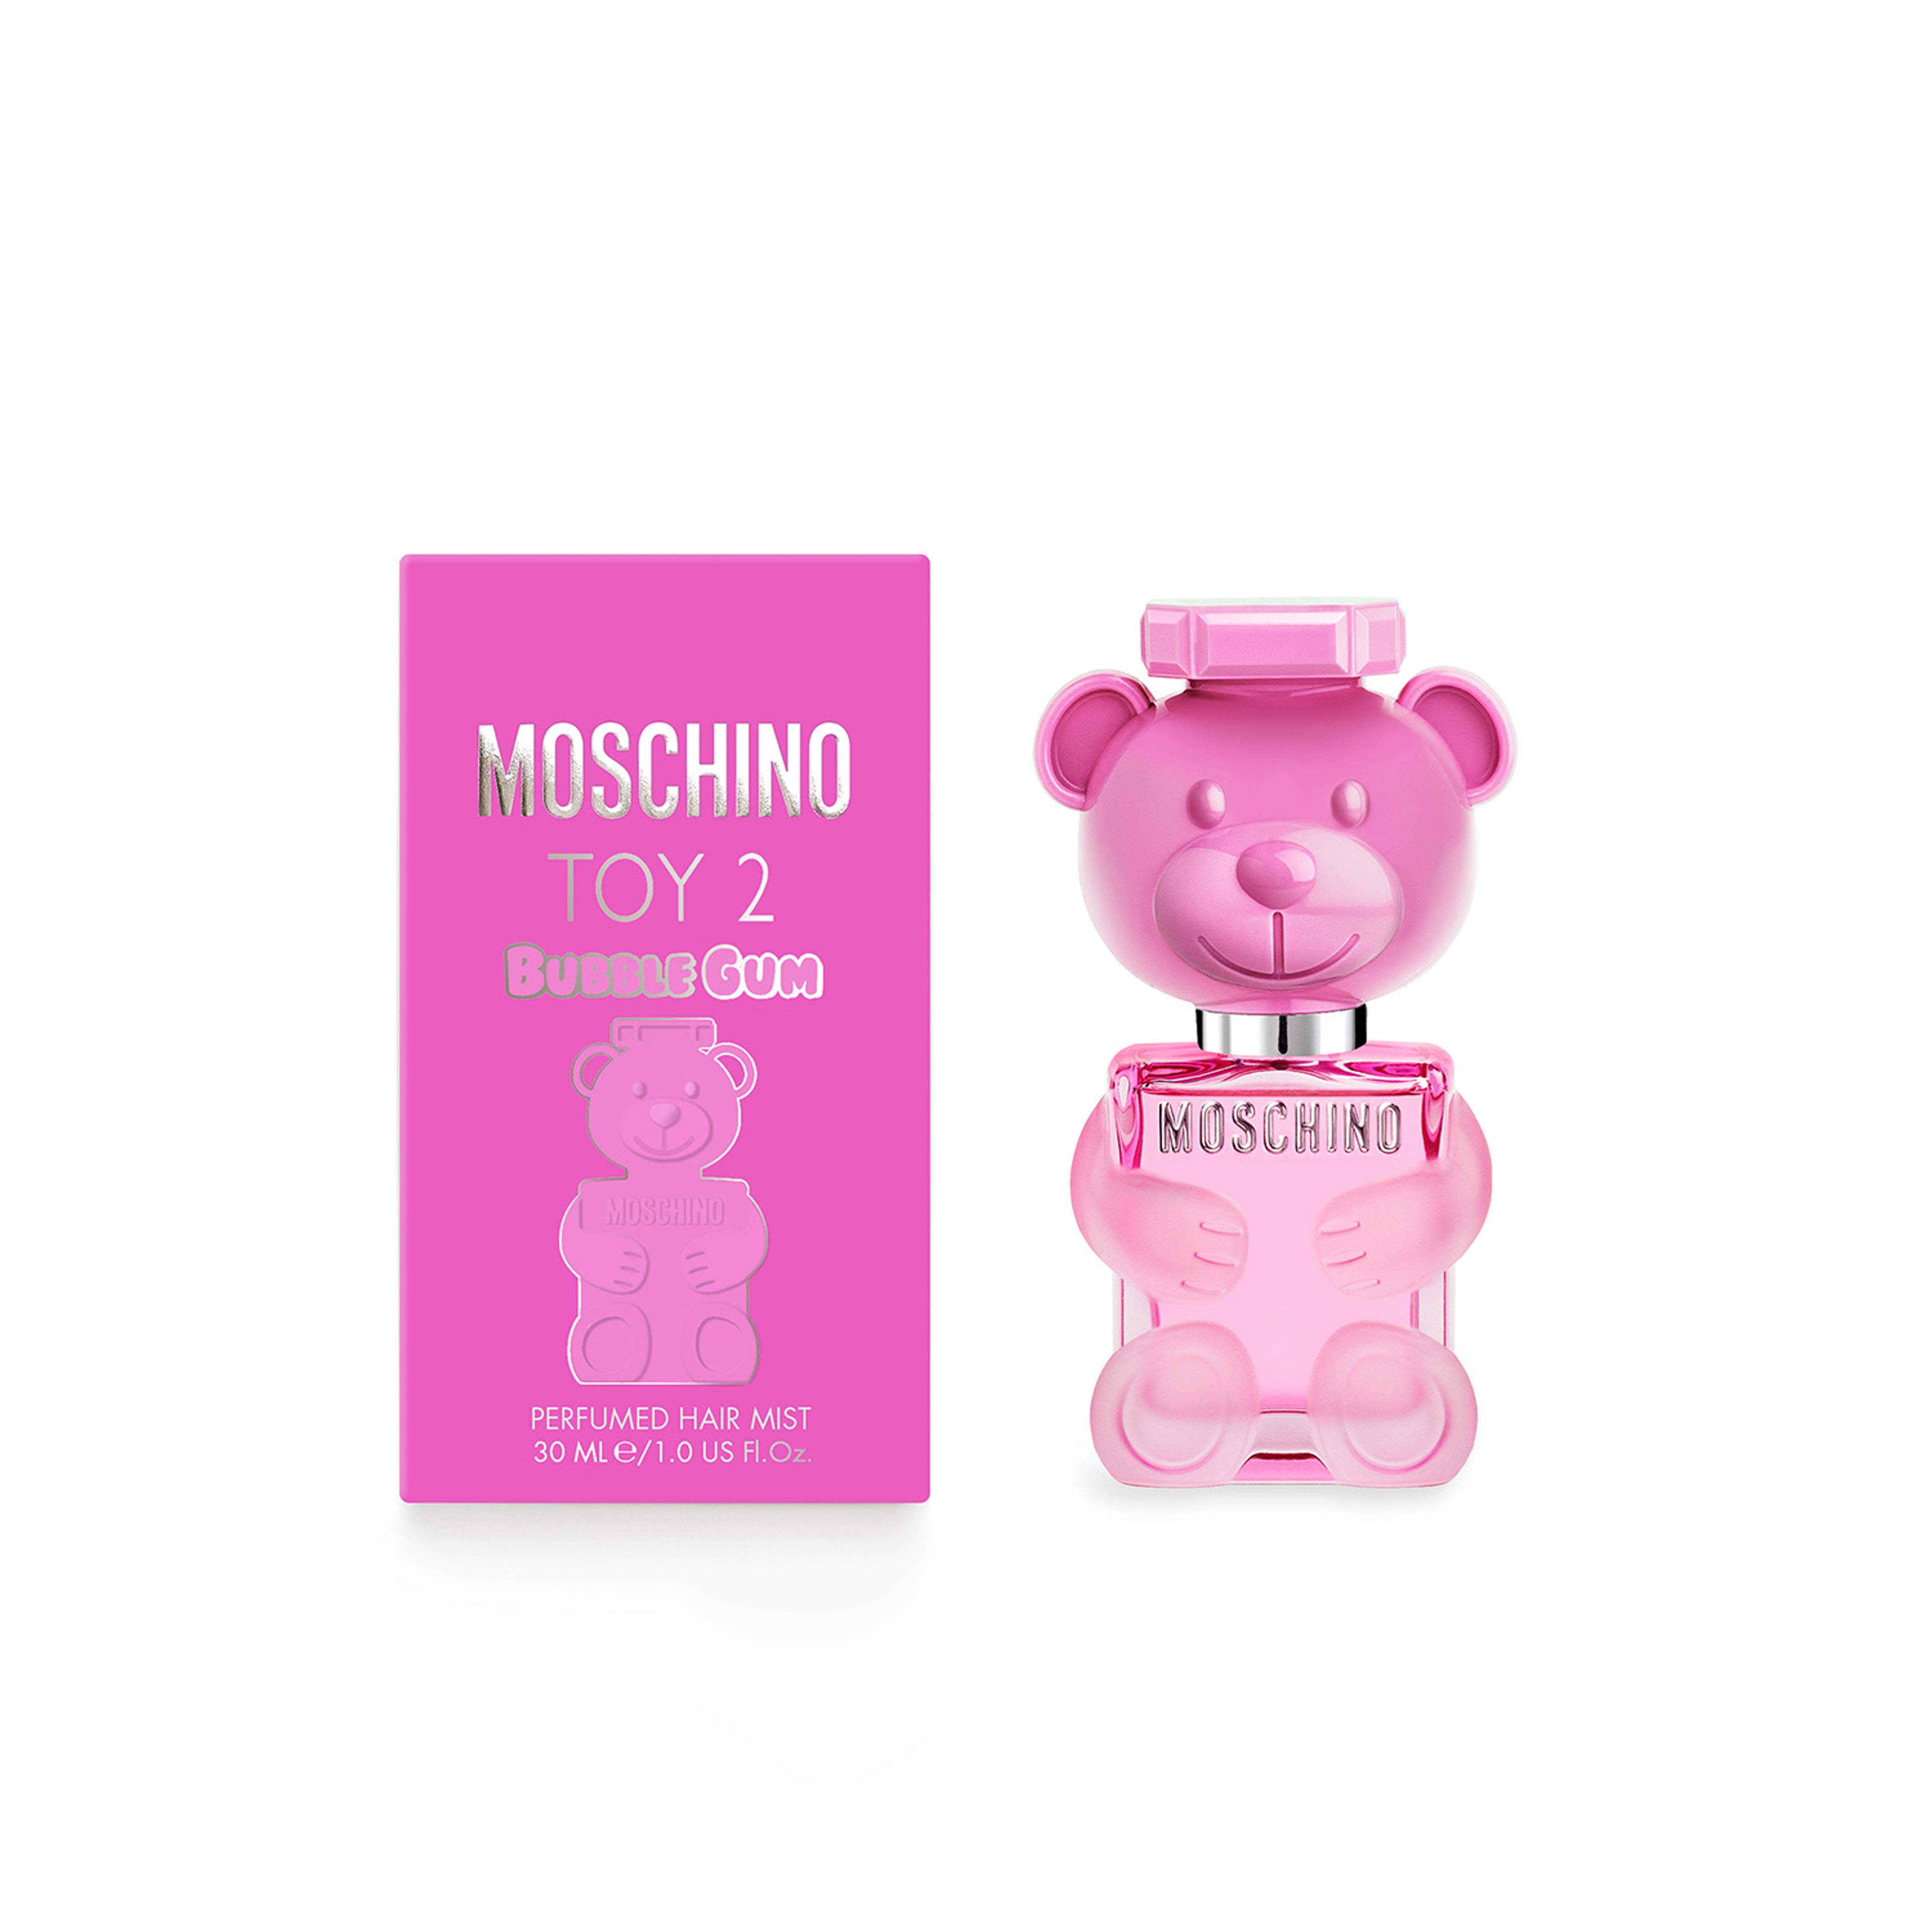 Moschino Moschino Toy 2 Bubble Gum Perfumed Hair Mist 2